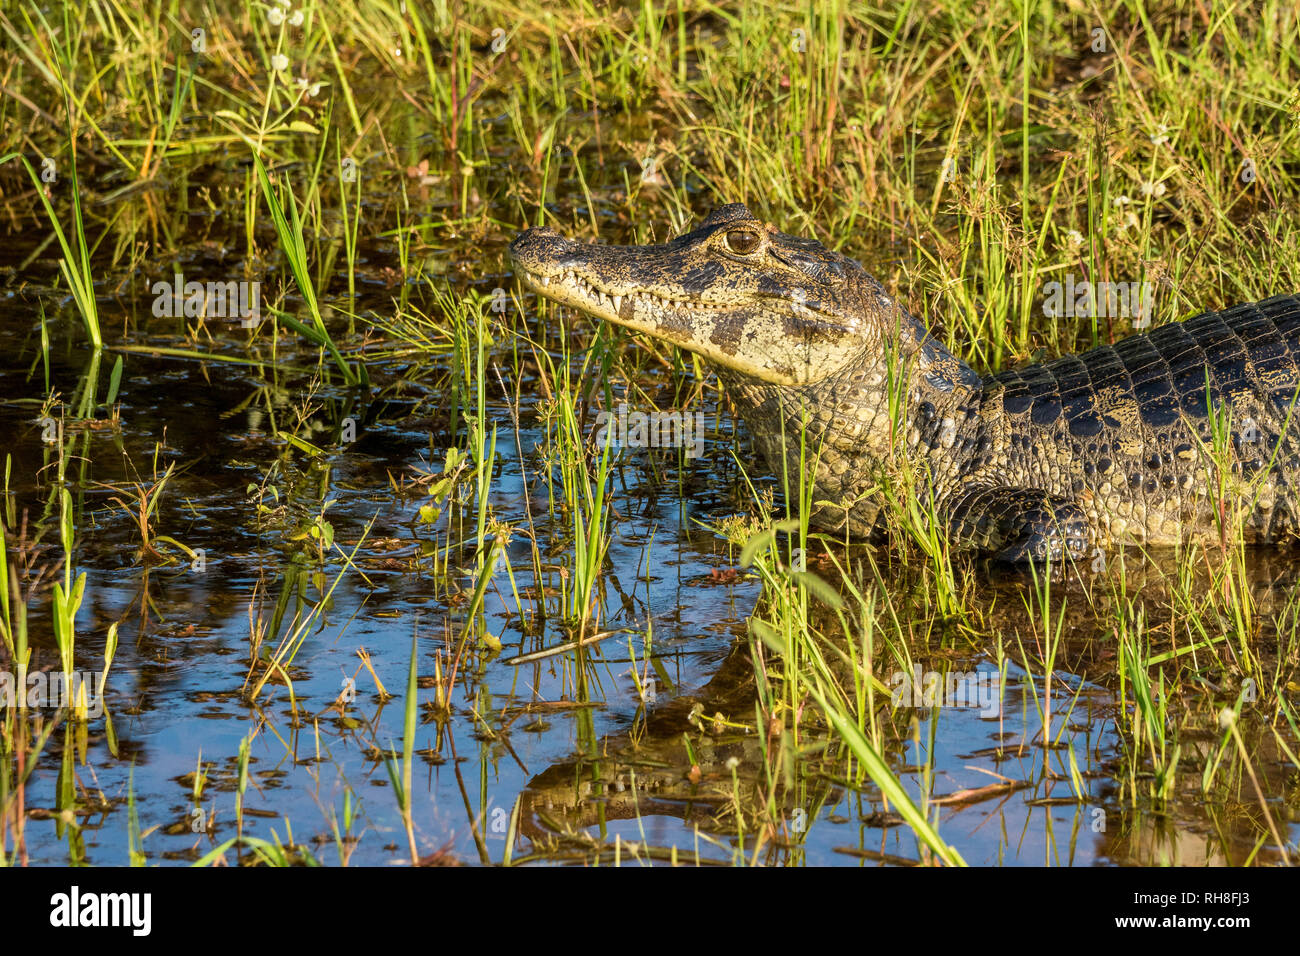 a young caiman in the brazilian wetlands of the Pantanal Stock Photo